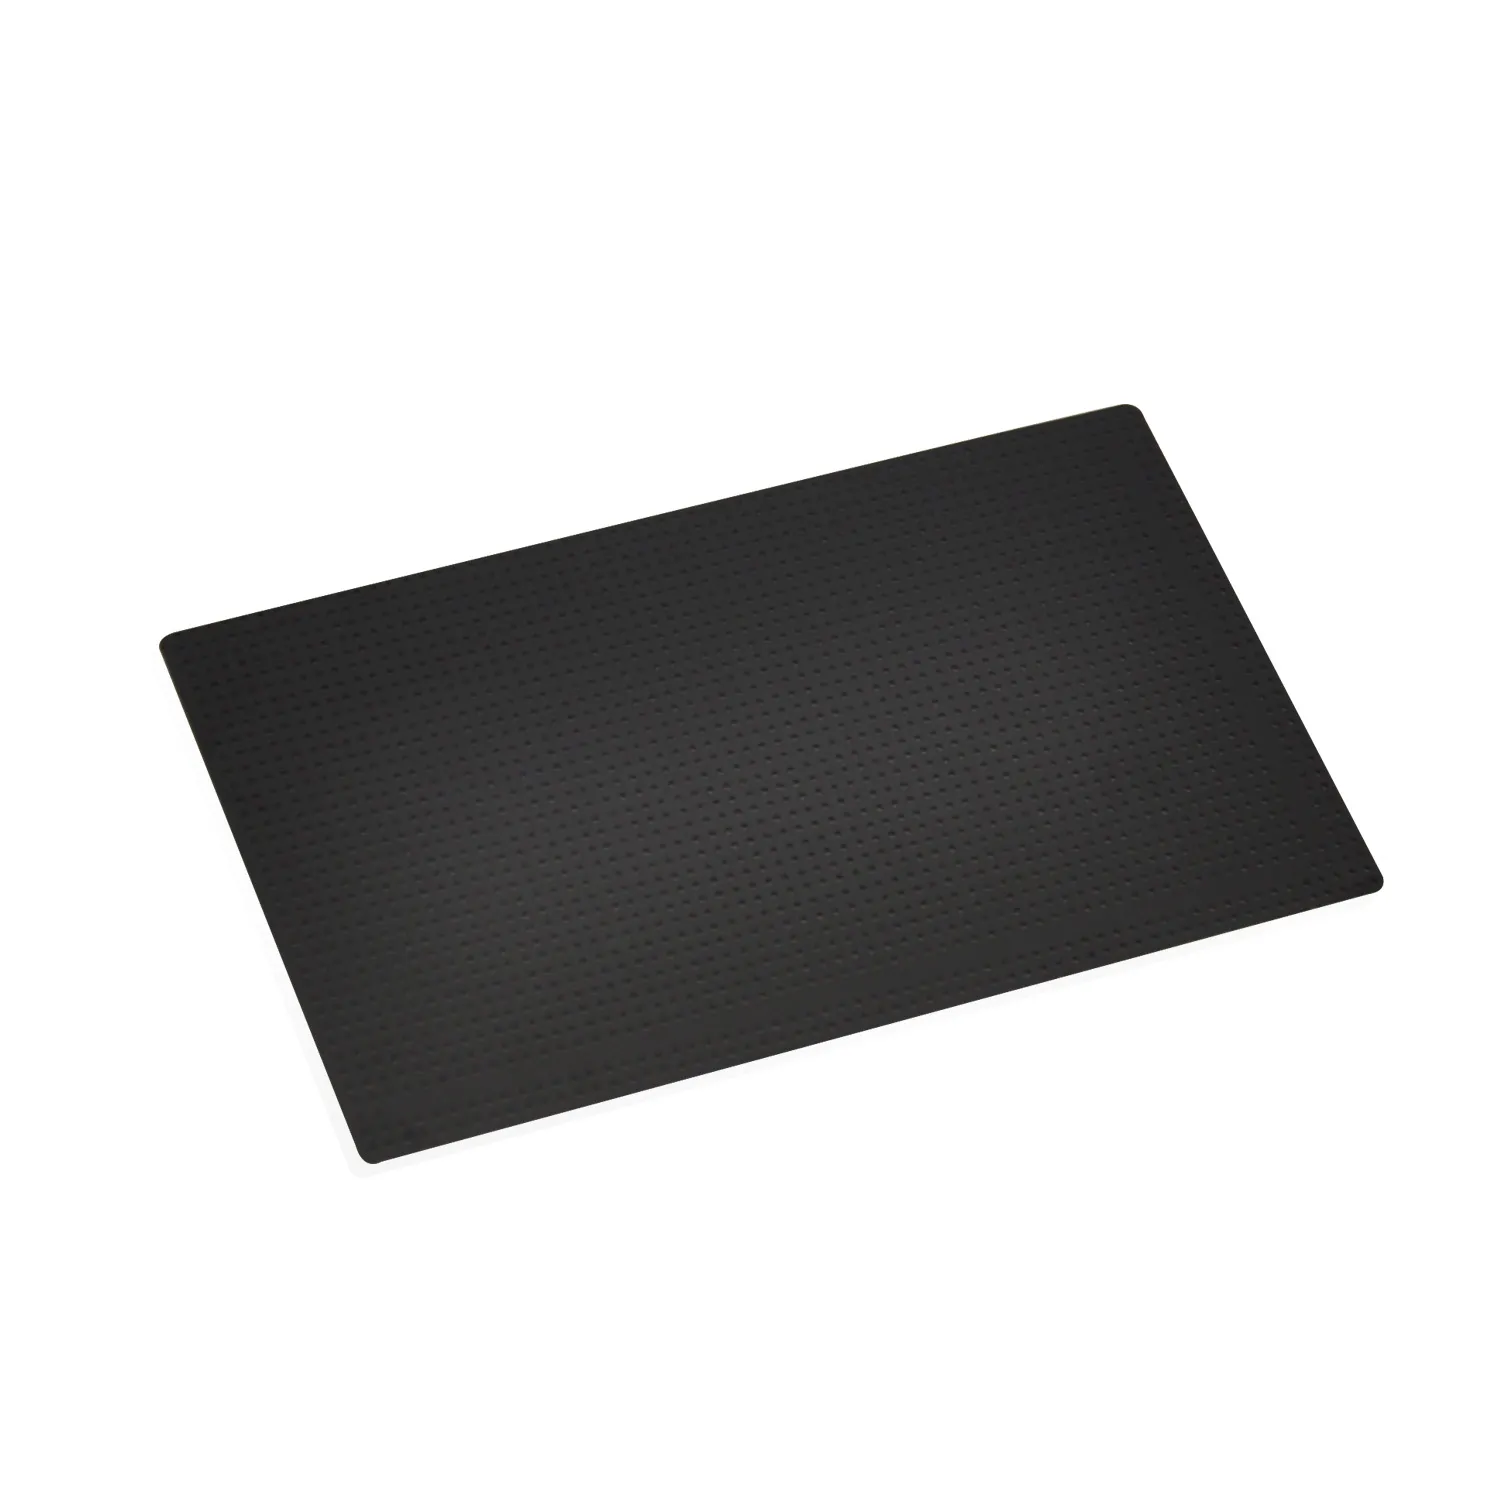 OEM New TouchPad Sticker pour Lenovo IBM ThinkPad T410 T410I T410S T400S T420 S￩rie231W